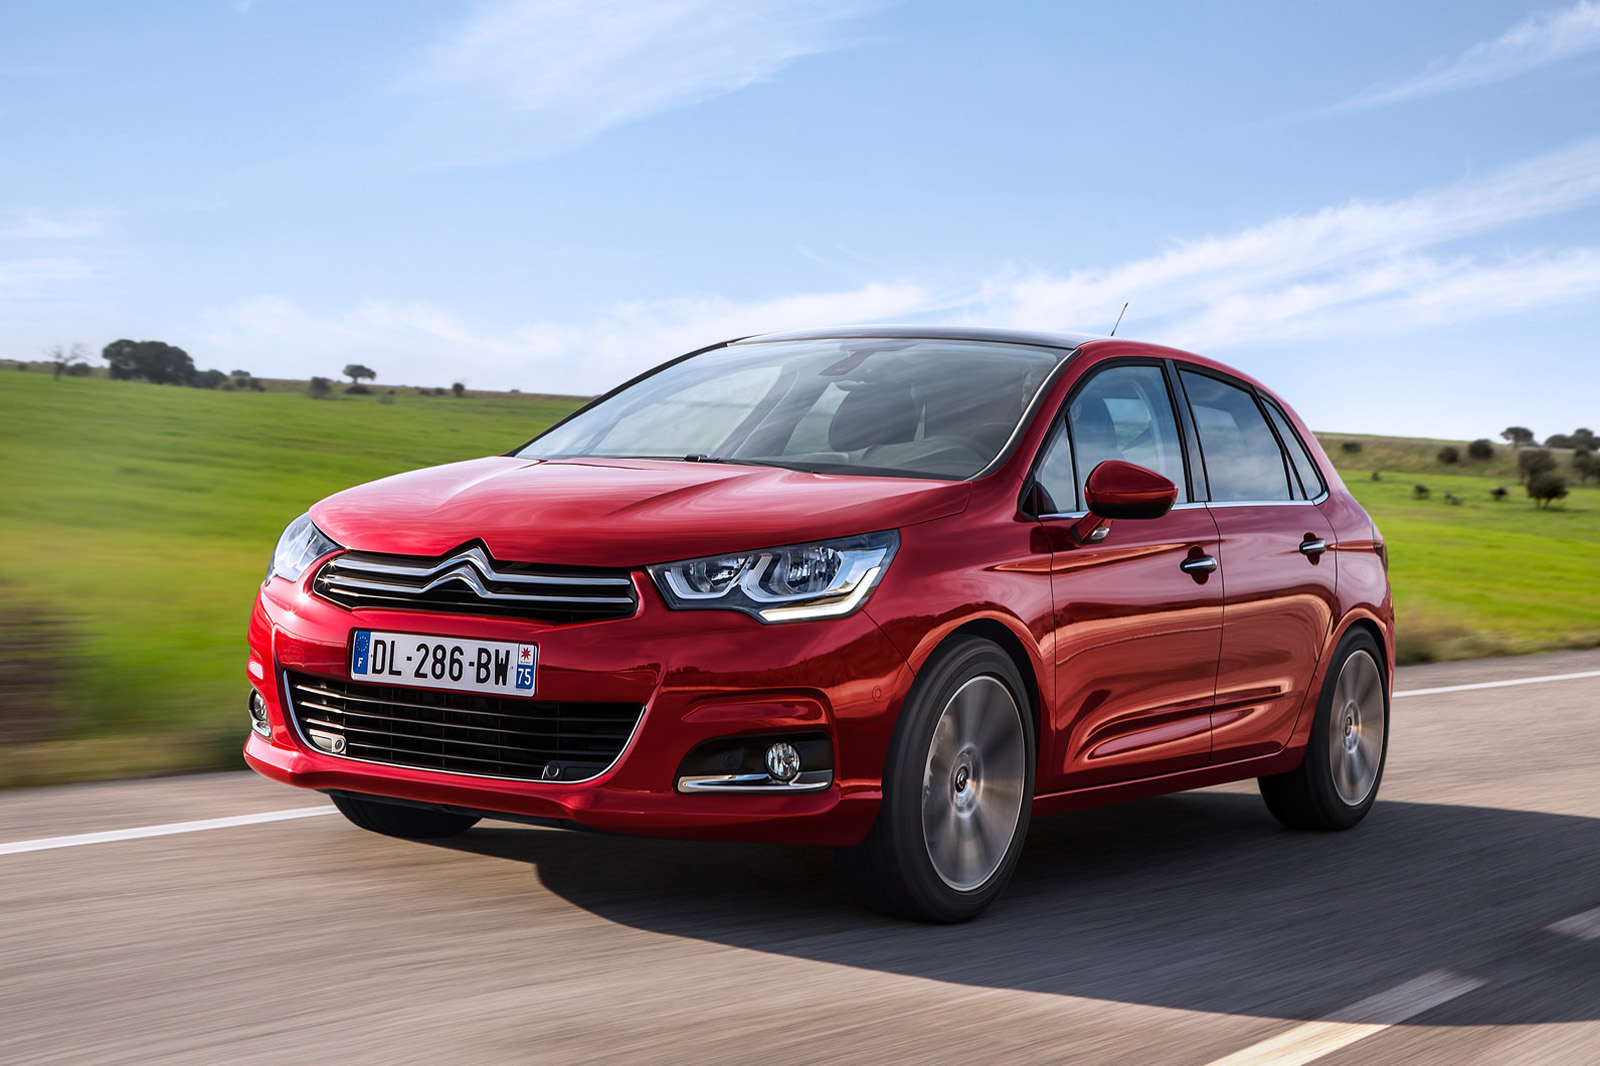 2015 Citroen C4 prices, onsale date and specification